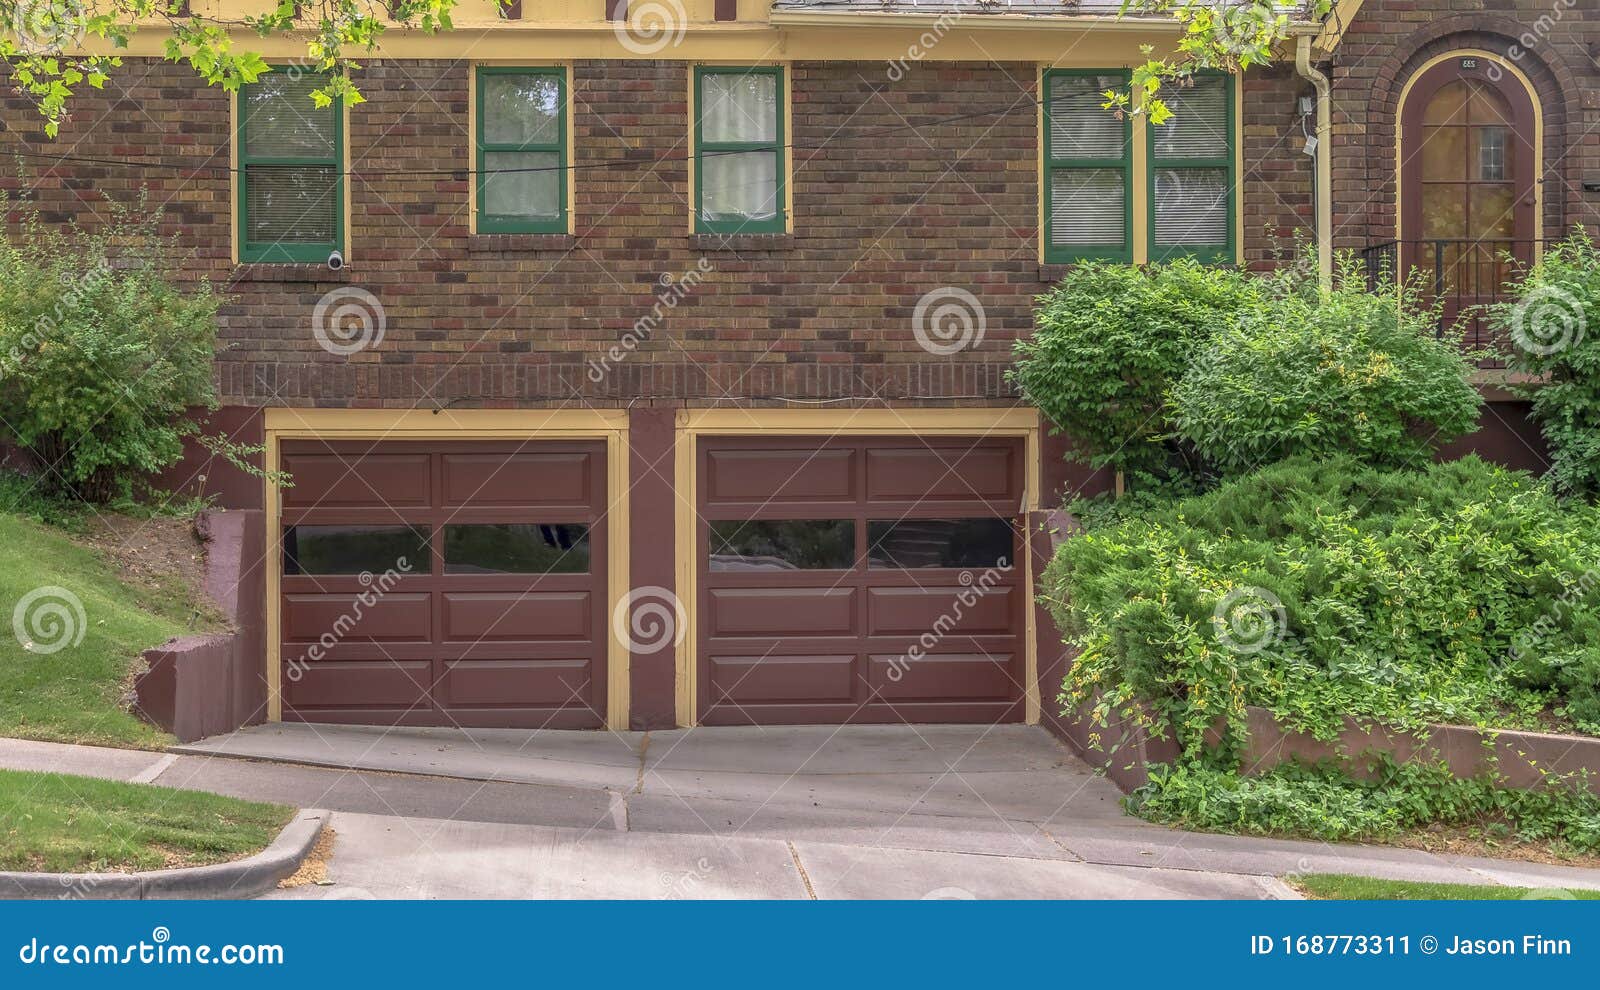 Panorama Frame Two Car Garage With Glass Panes On Door Of A House With